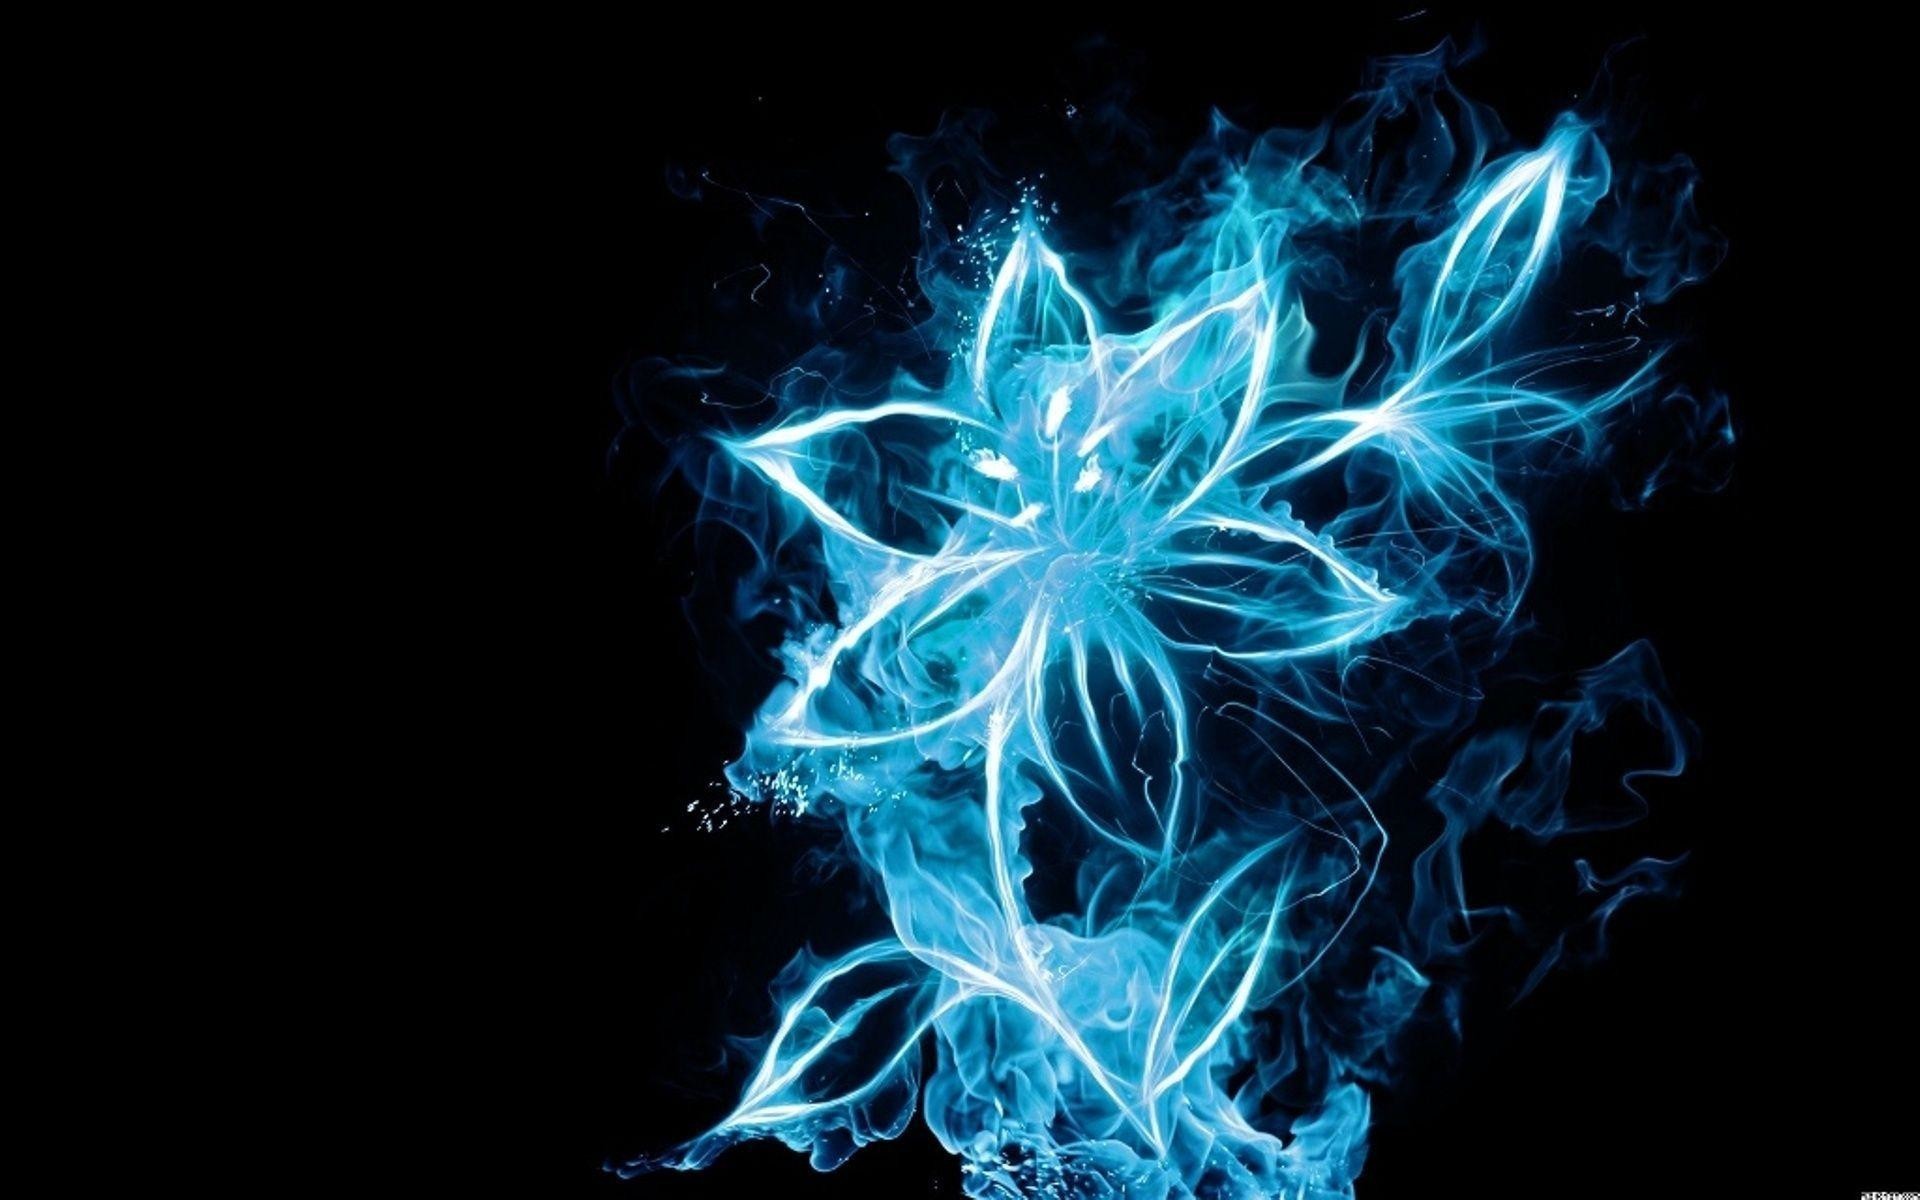 Blue Flames Wallpaper Abstract Background Stock Image  Image of inferno  light 223046441